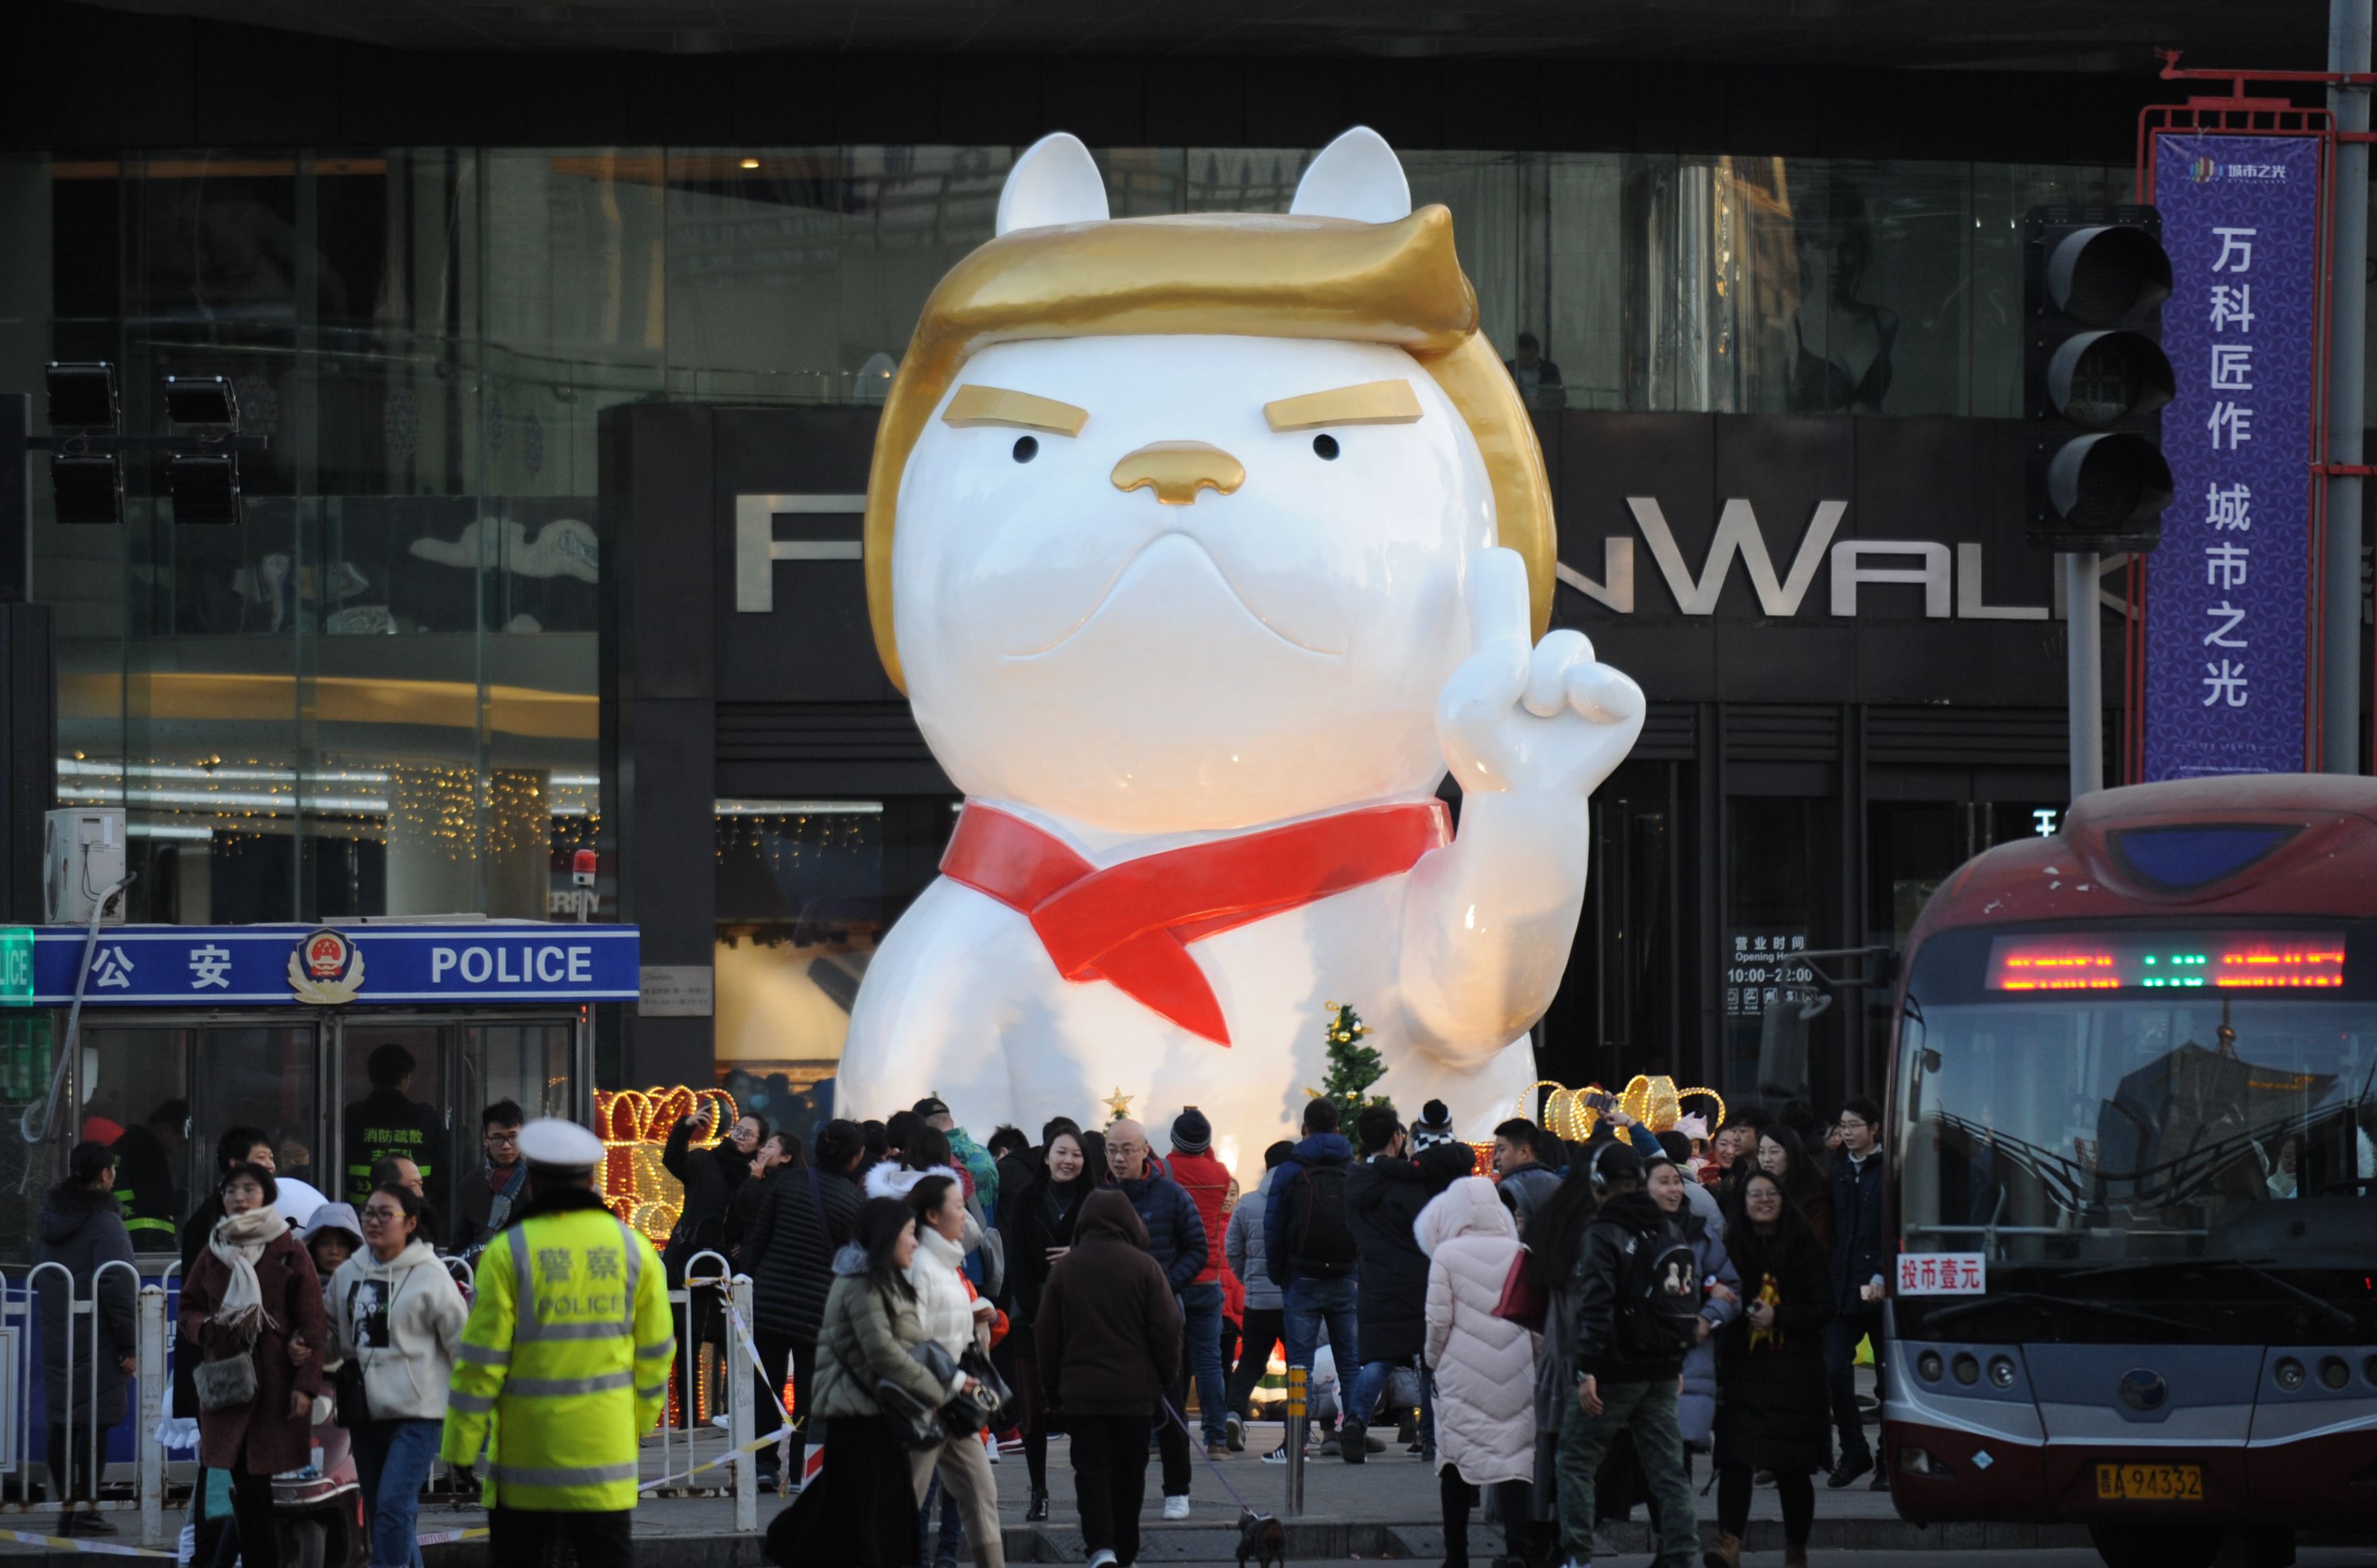 Dog Sculpture With Donald Trump's Gesture In Taiyuan